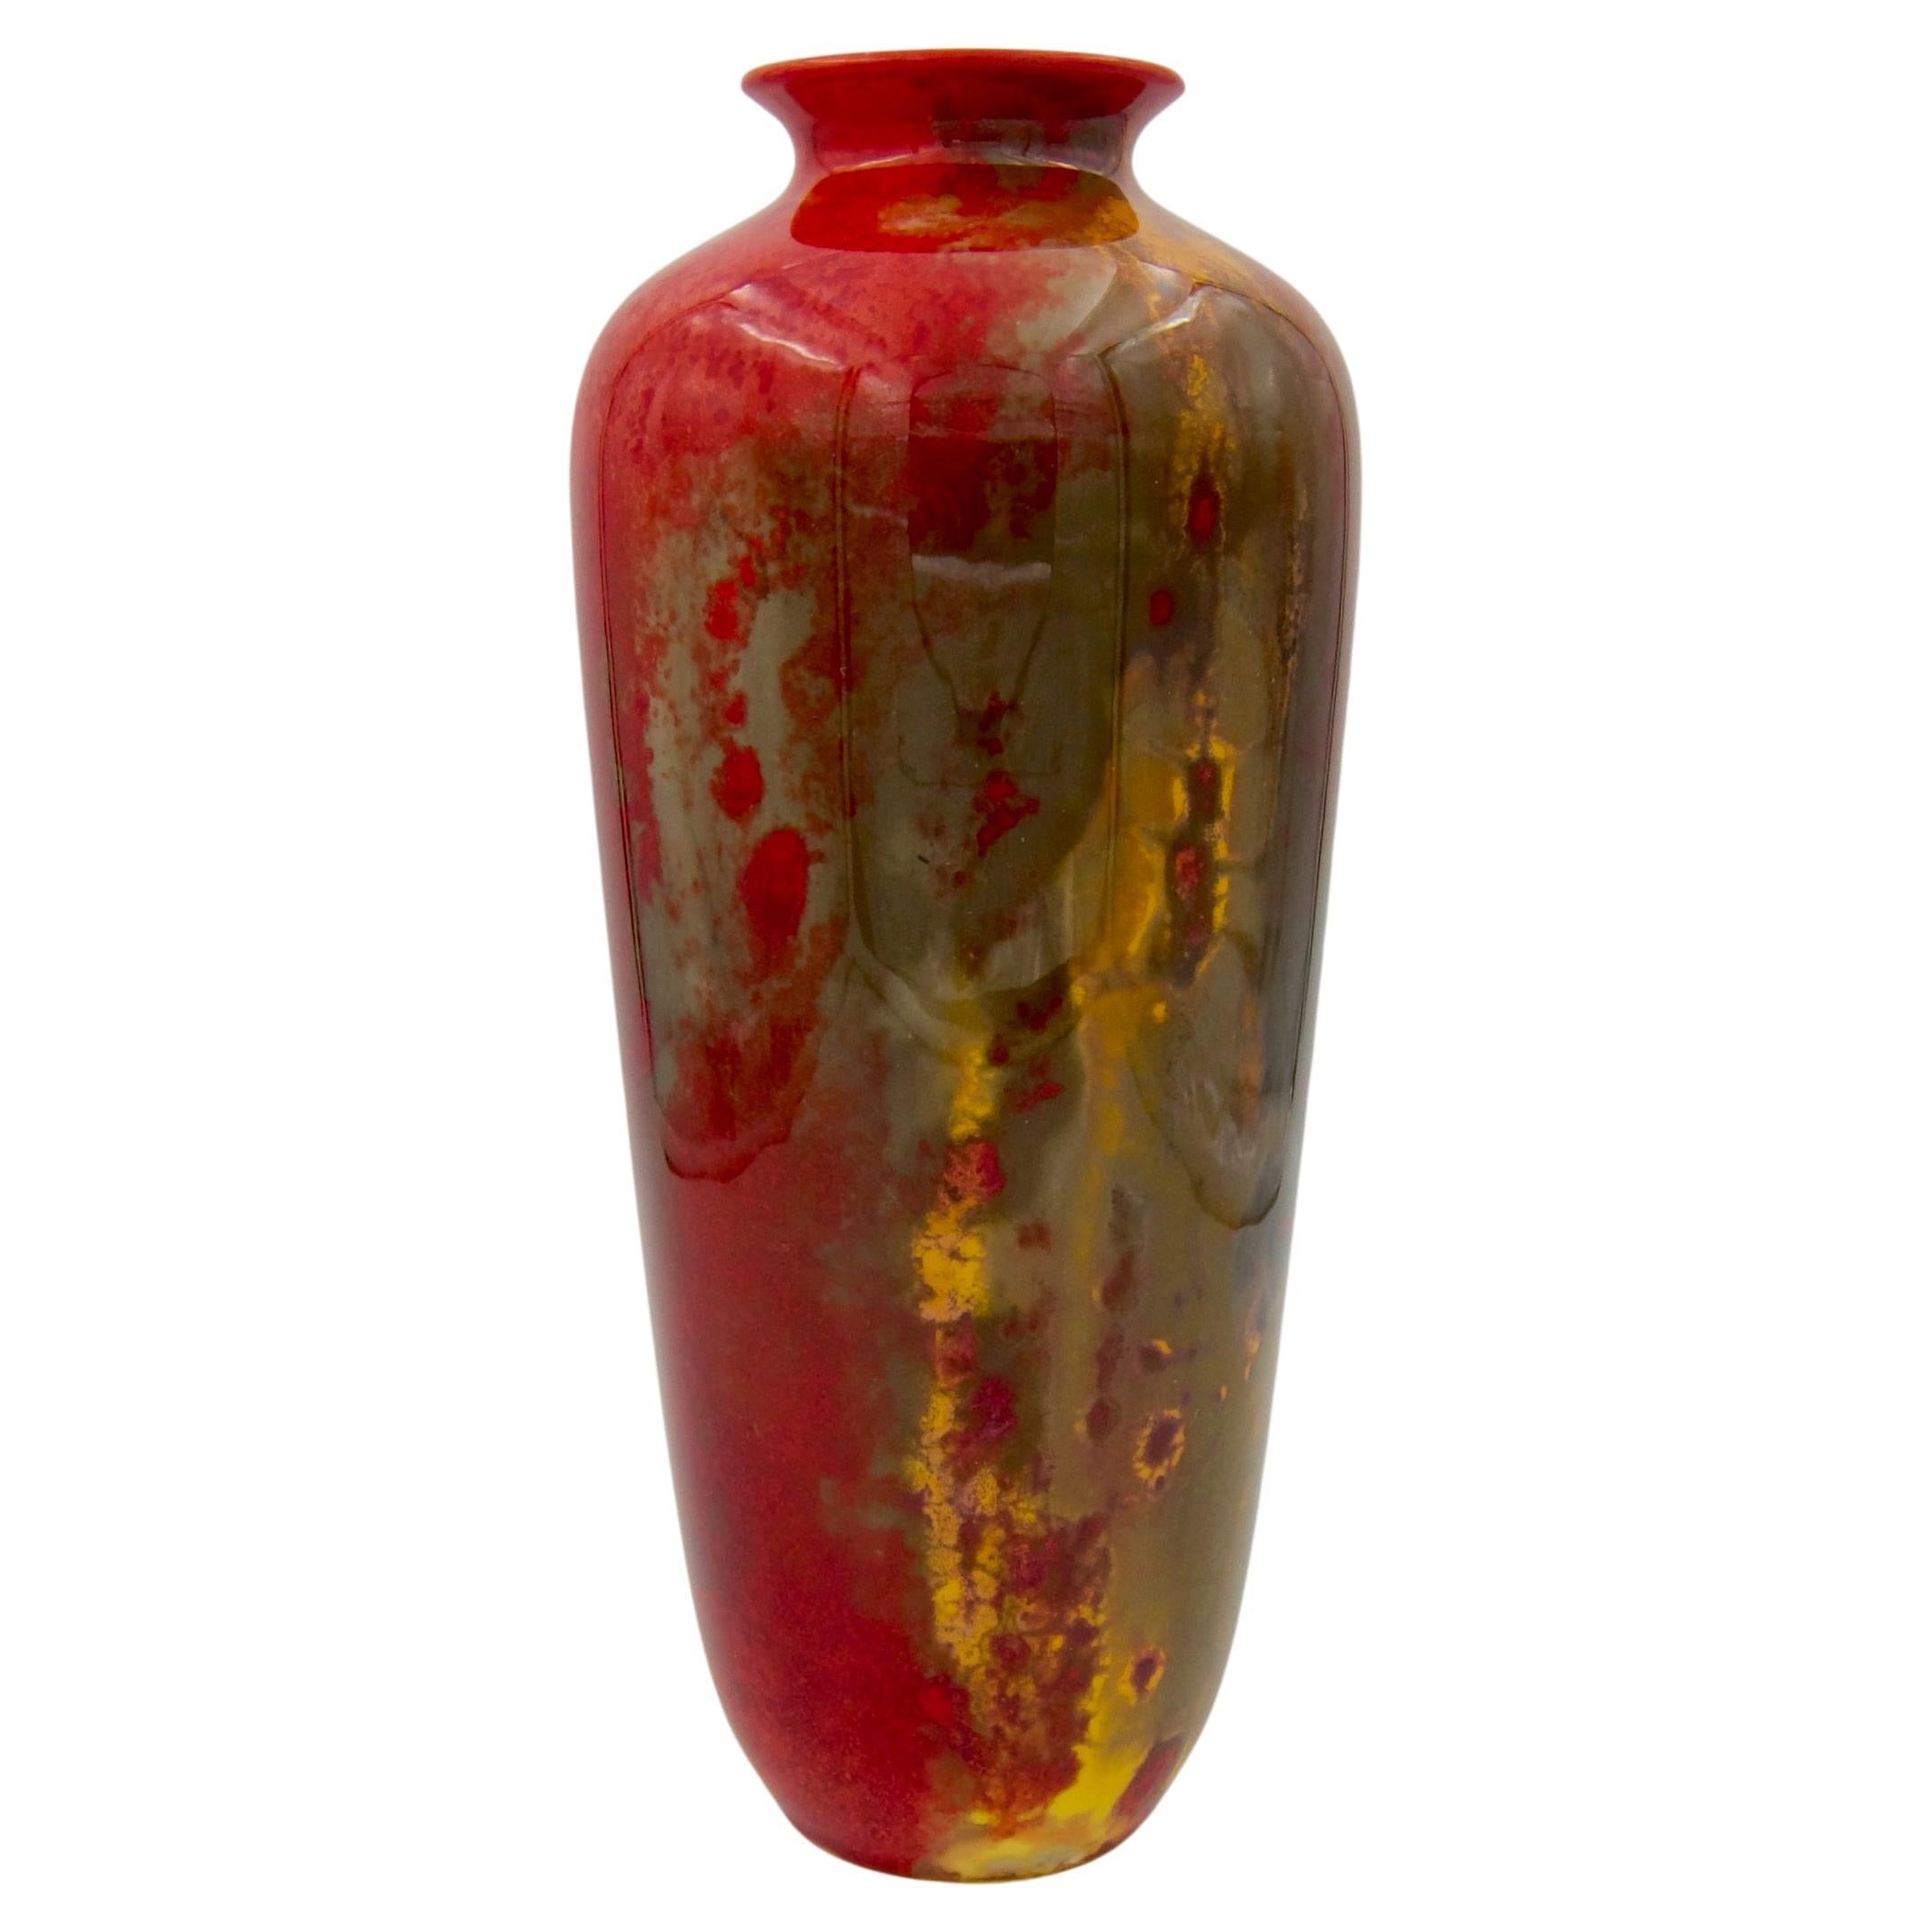 Signed Art Deco Doulton Vase with Flambe Glaze in Red and Gold